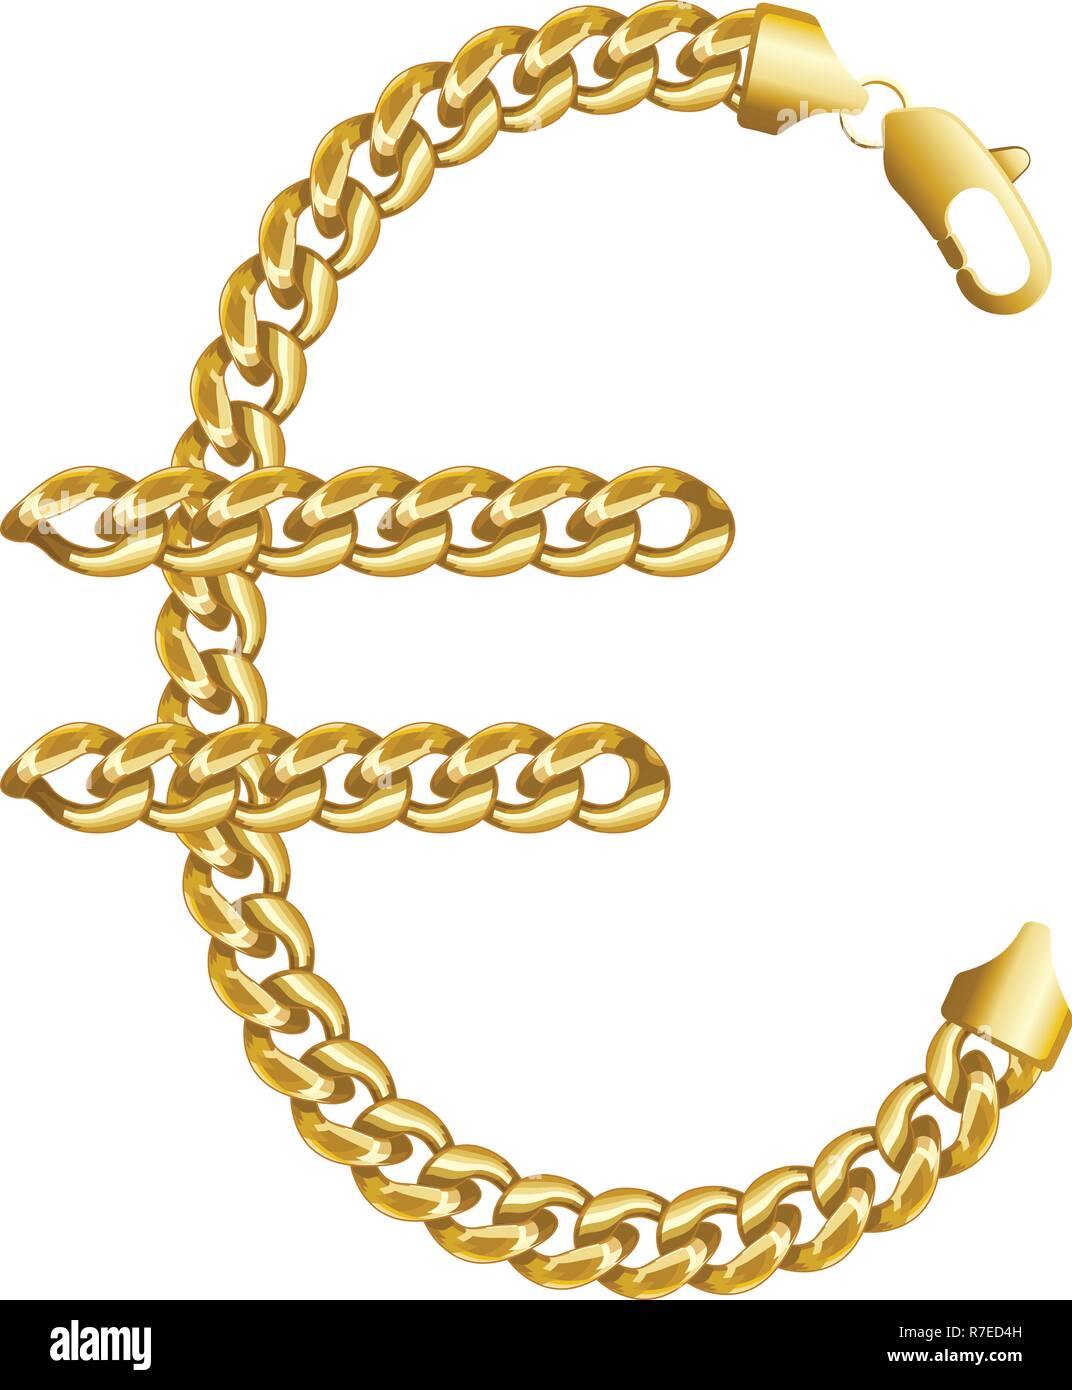 Gold euro money sign made of shiny thick golden chains. Stock Vector